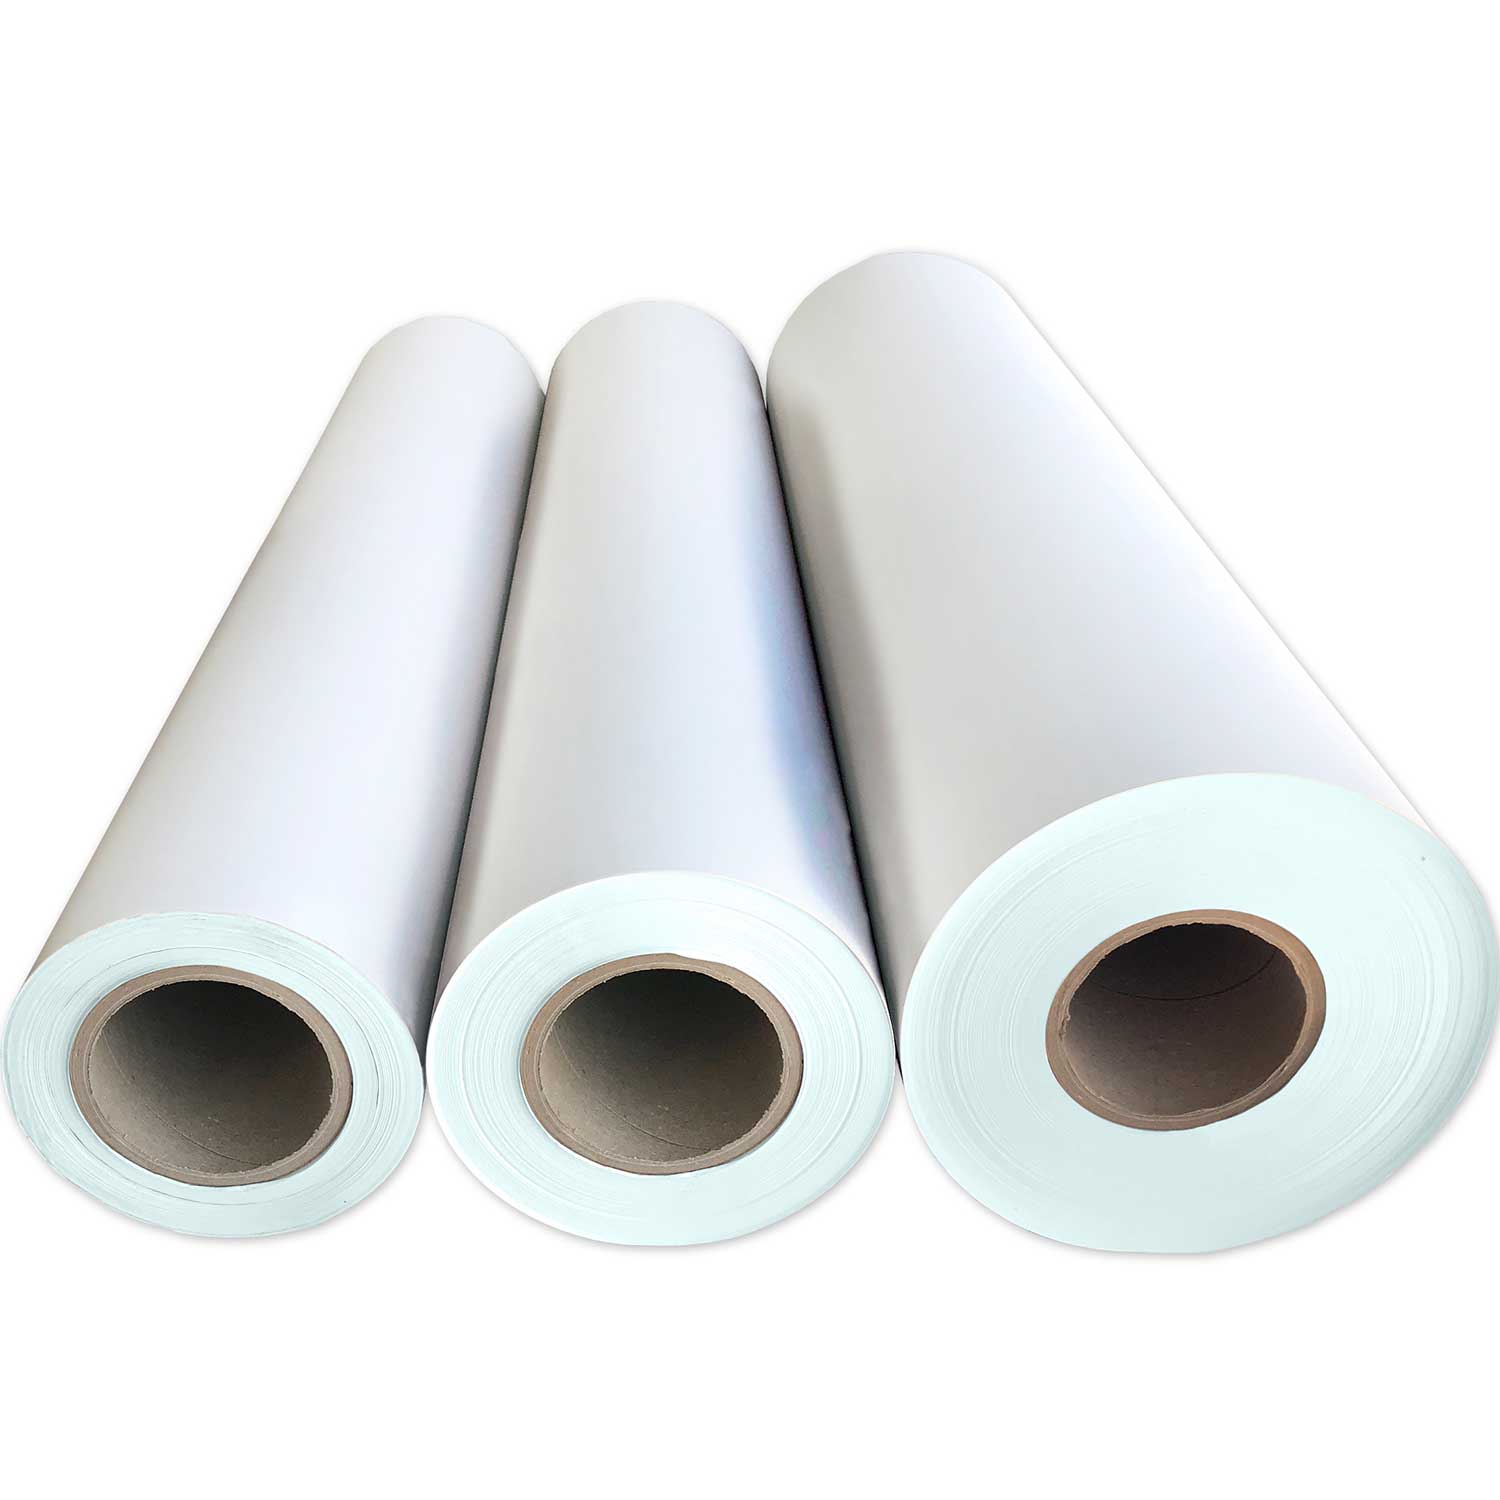 Plain Matt White Wrapping Paper Roll 10m Roll By The Wedding of my Dreams